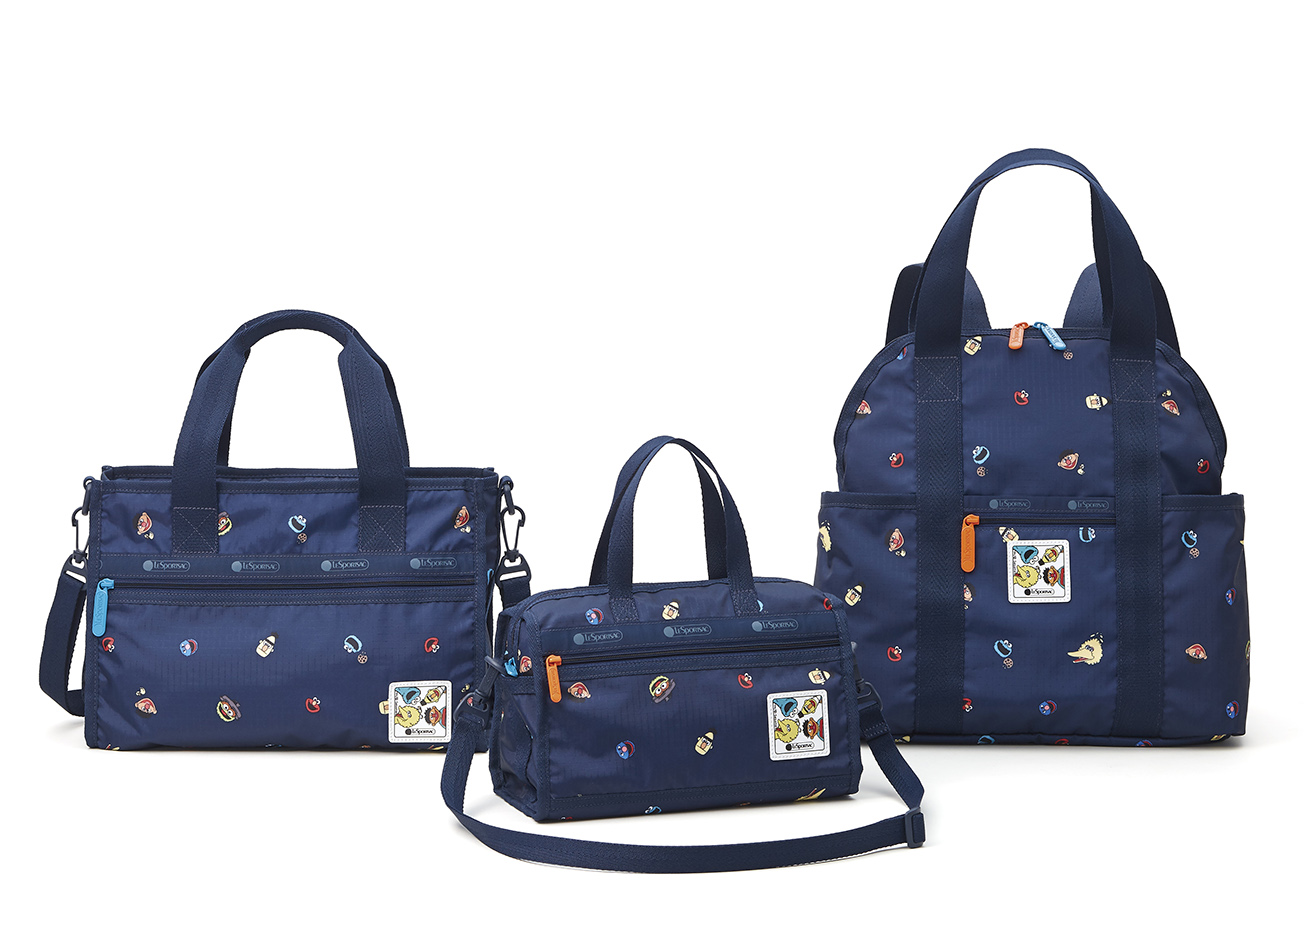 LeSportsac” × “Sesame Street” first collaboration campaign!